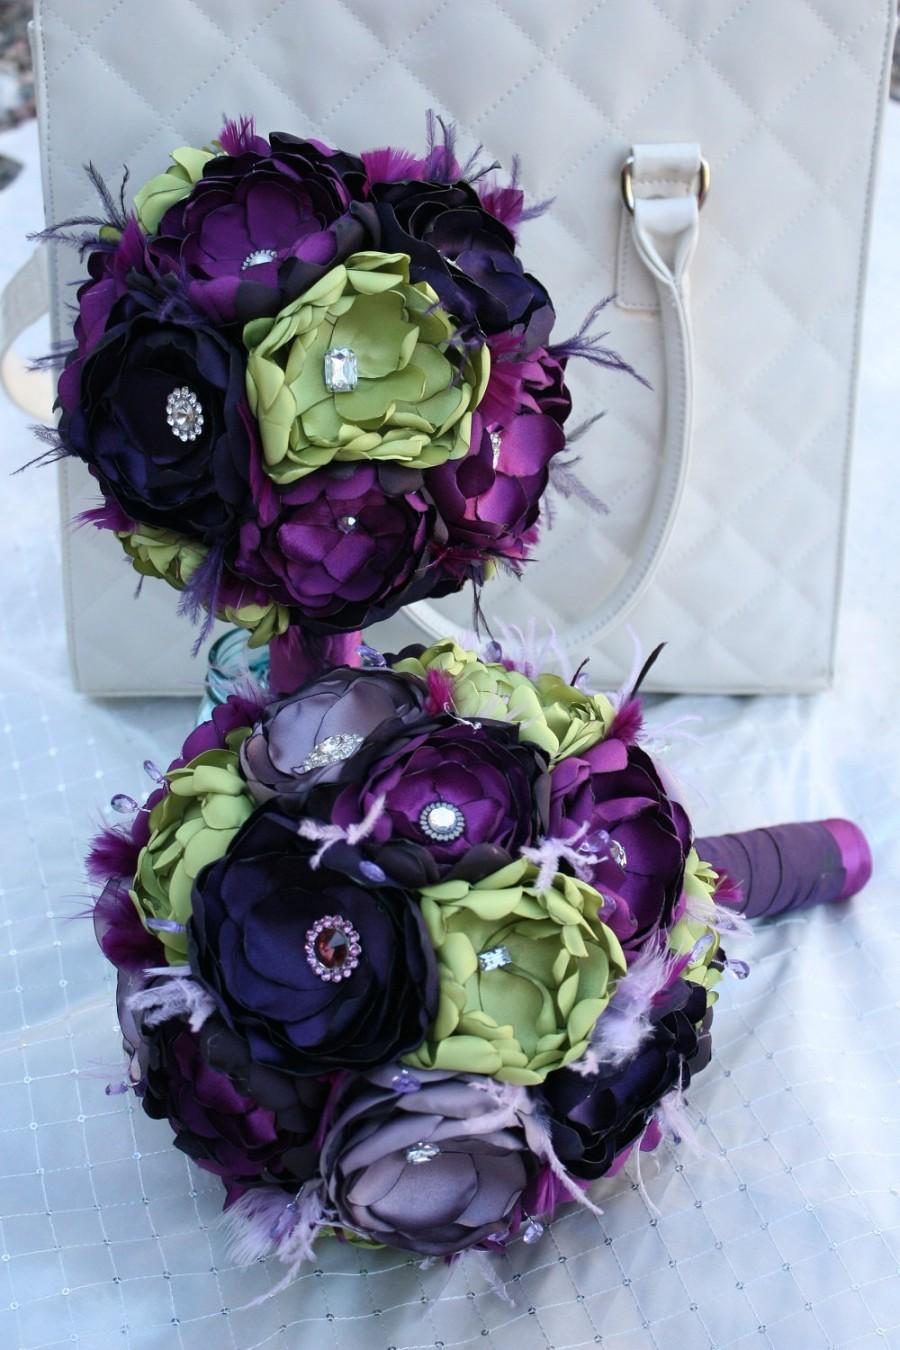 Hochzeit - Handmade Fabric Flower Wedding Package in Purples and Green - Bridal bouquet - Boutonnieres - Corsages - Brooch bouquet -